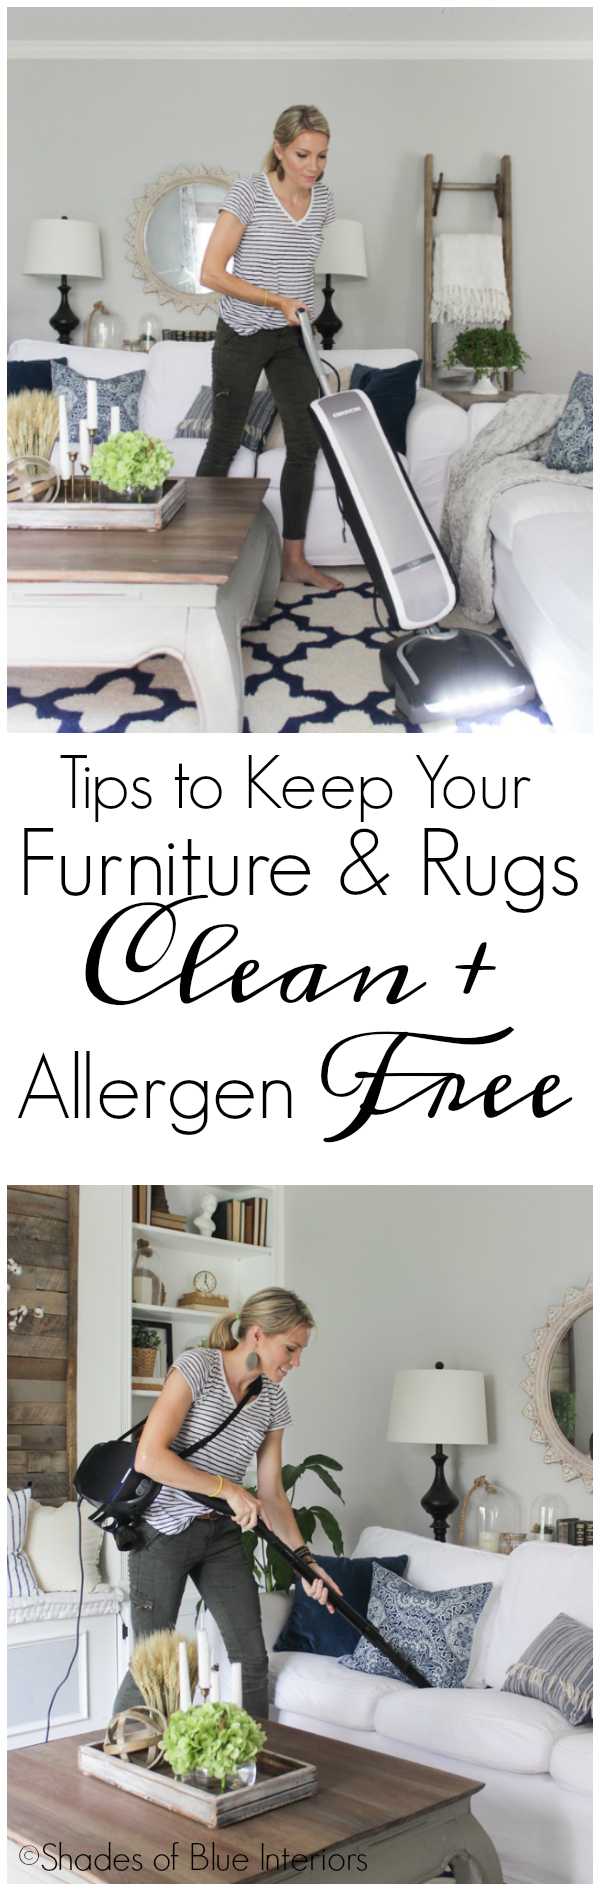 5 tips to keep your home clean and allergen free with a review of the new Oreck Elevate vacuum